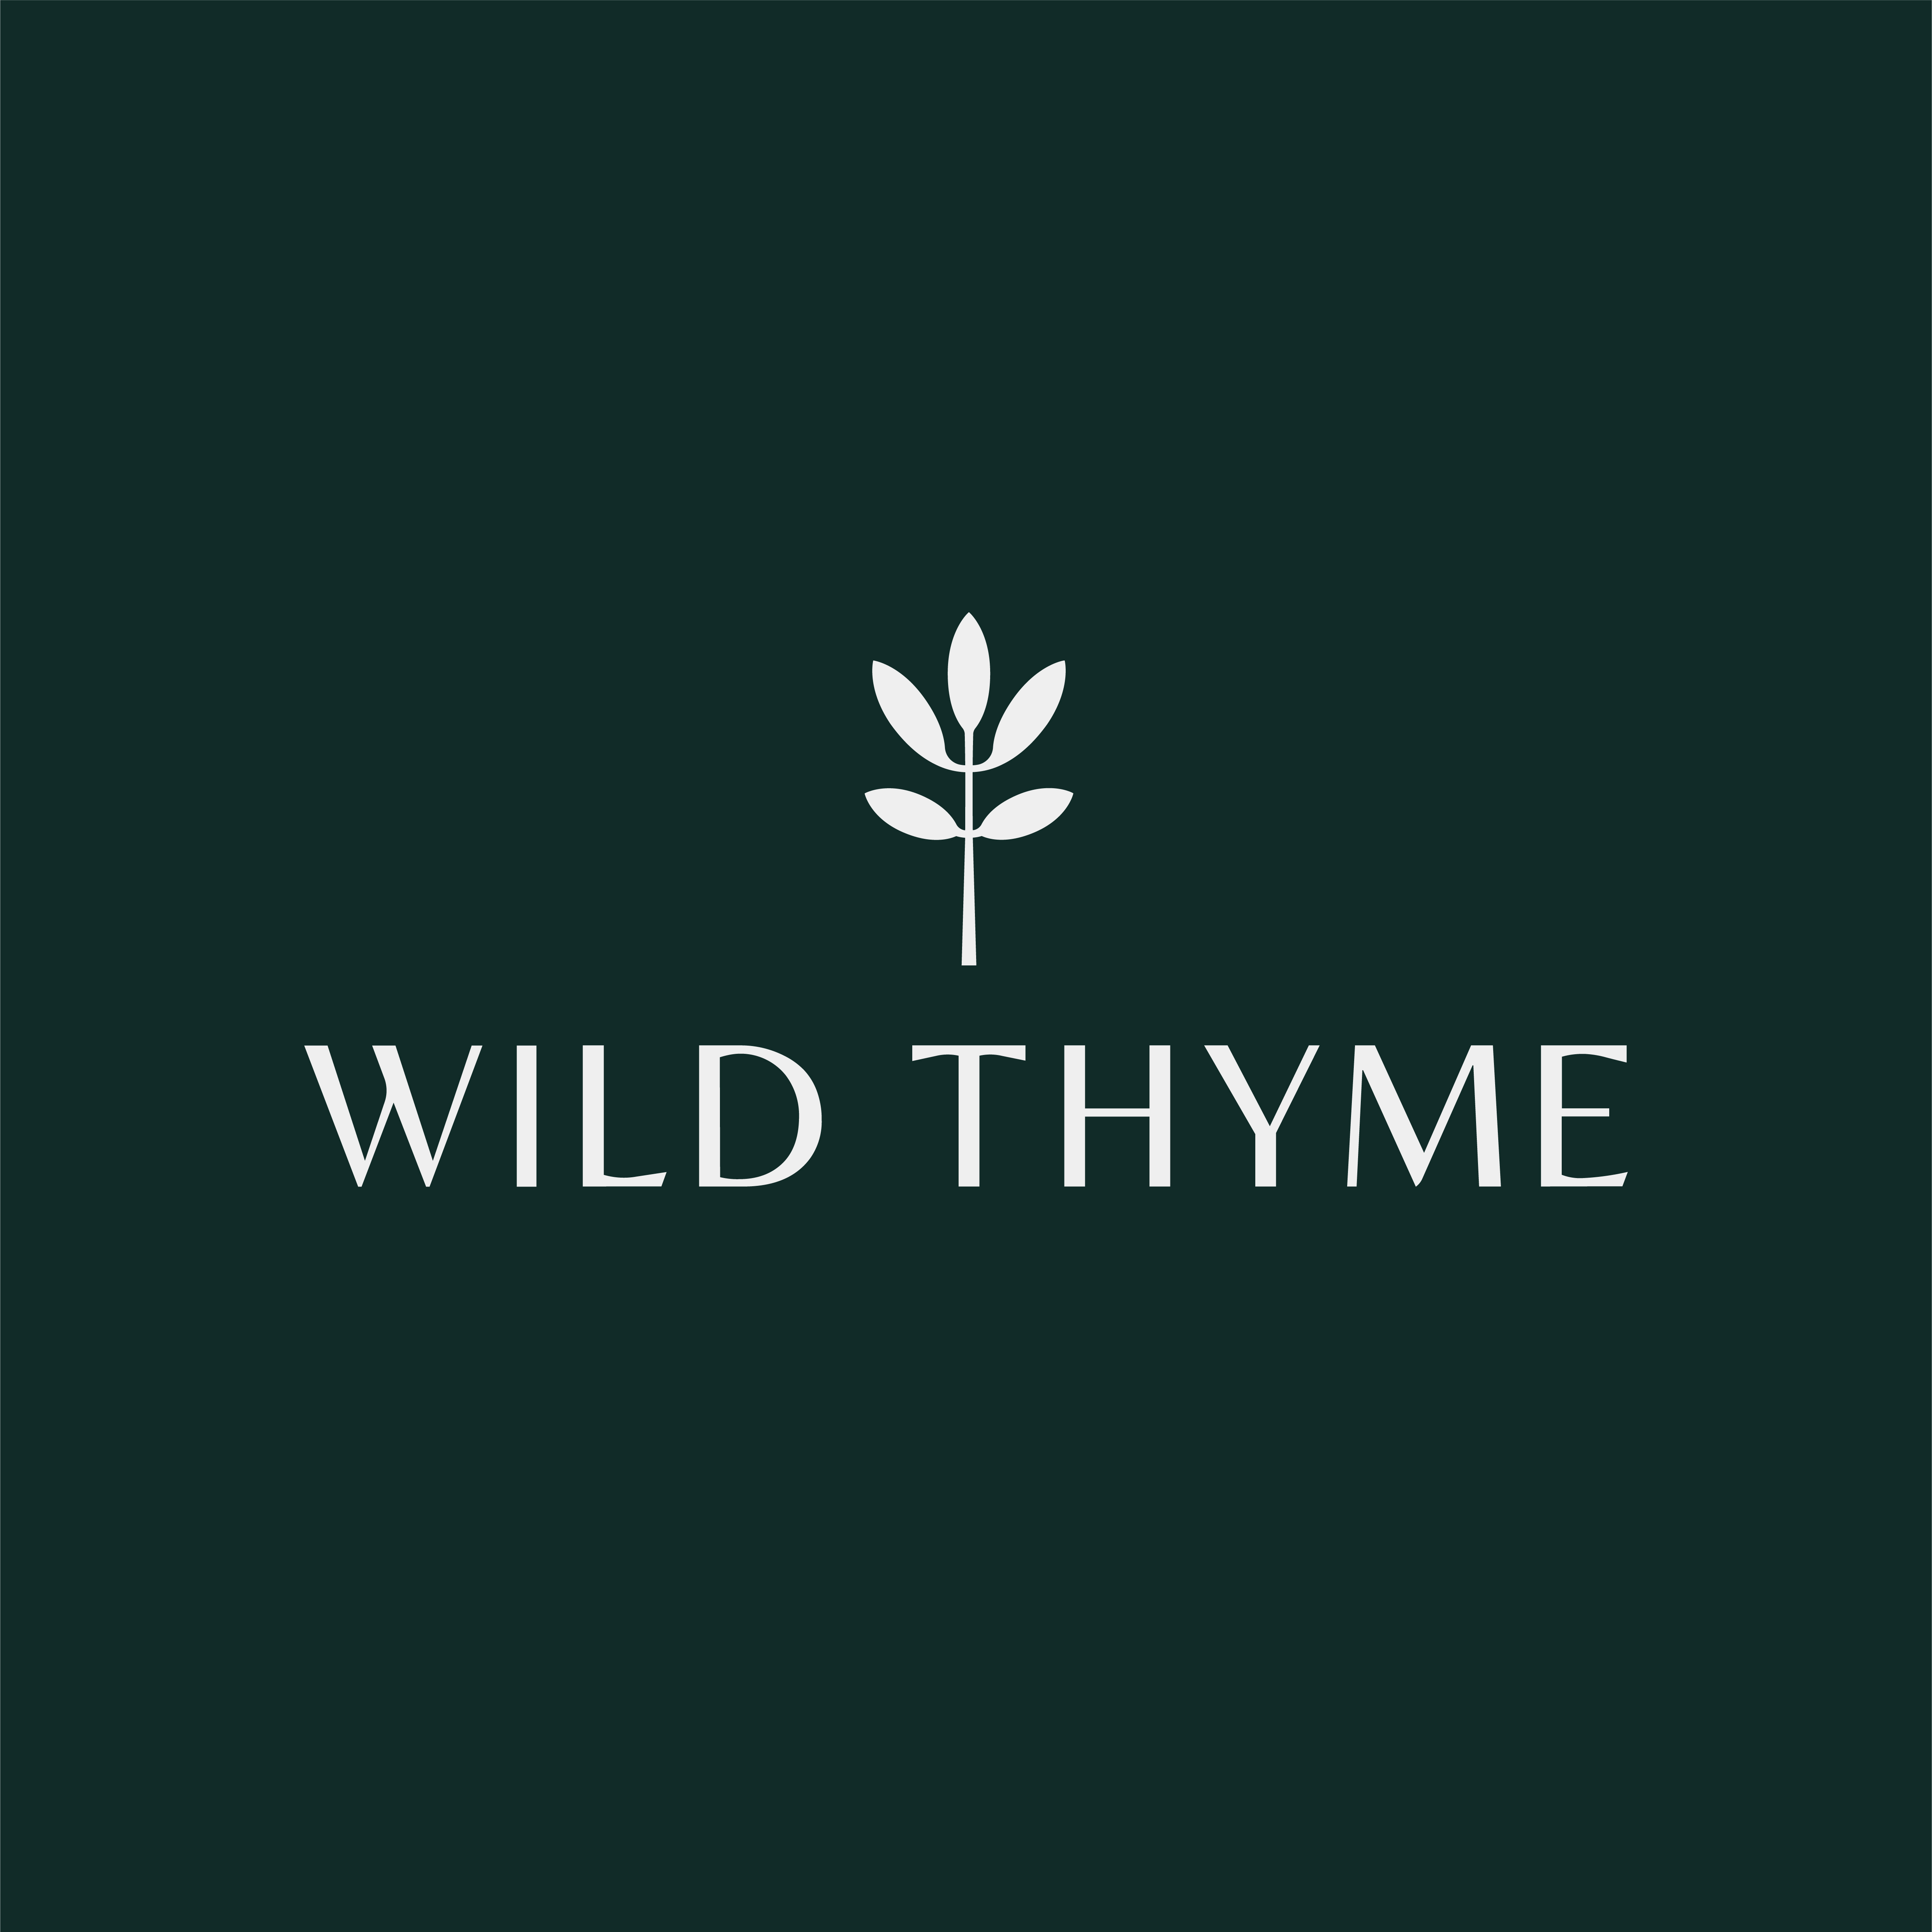 Studio Unbound Is Excited to Reveal Their Latest Collaboration With the London Café, Wild Thyme